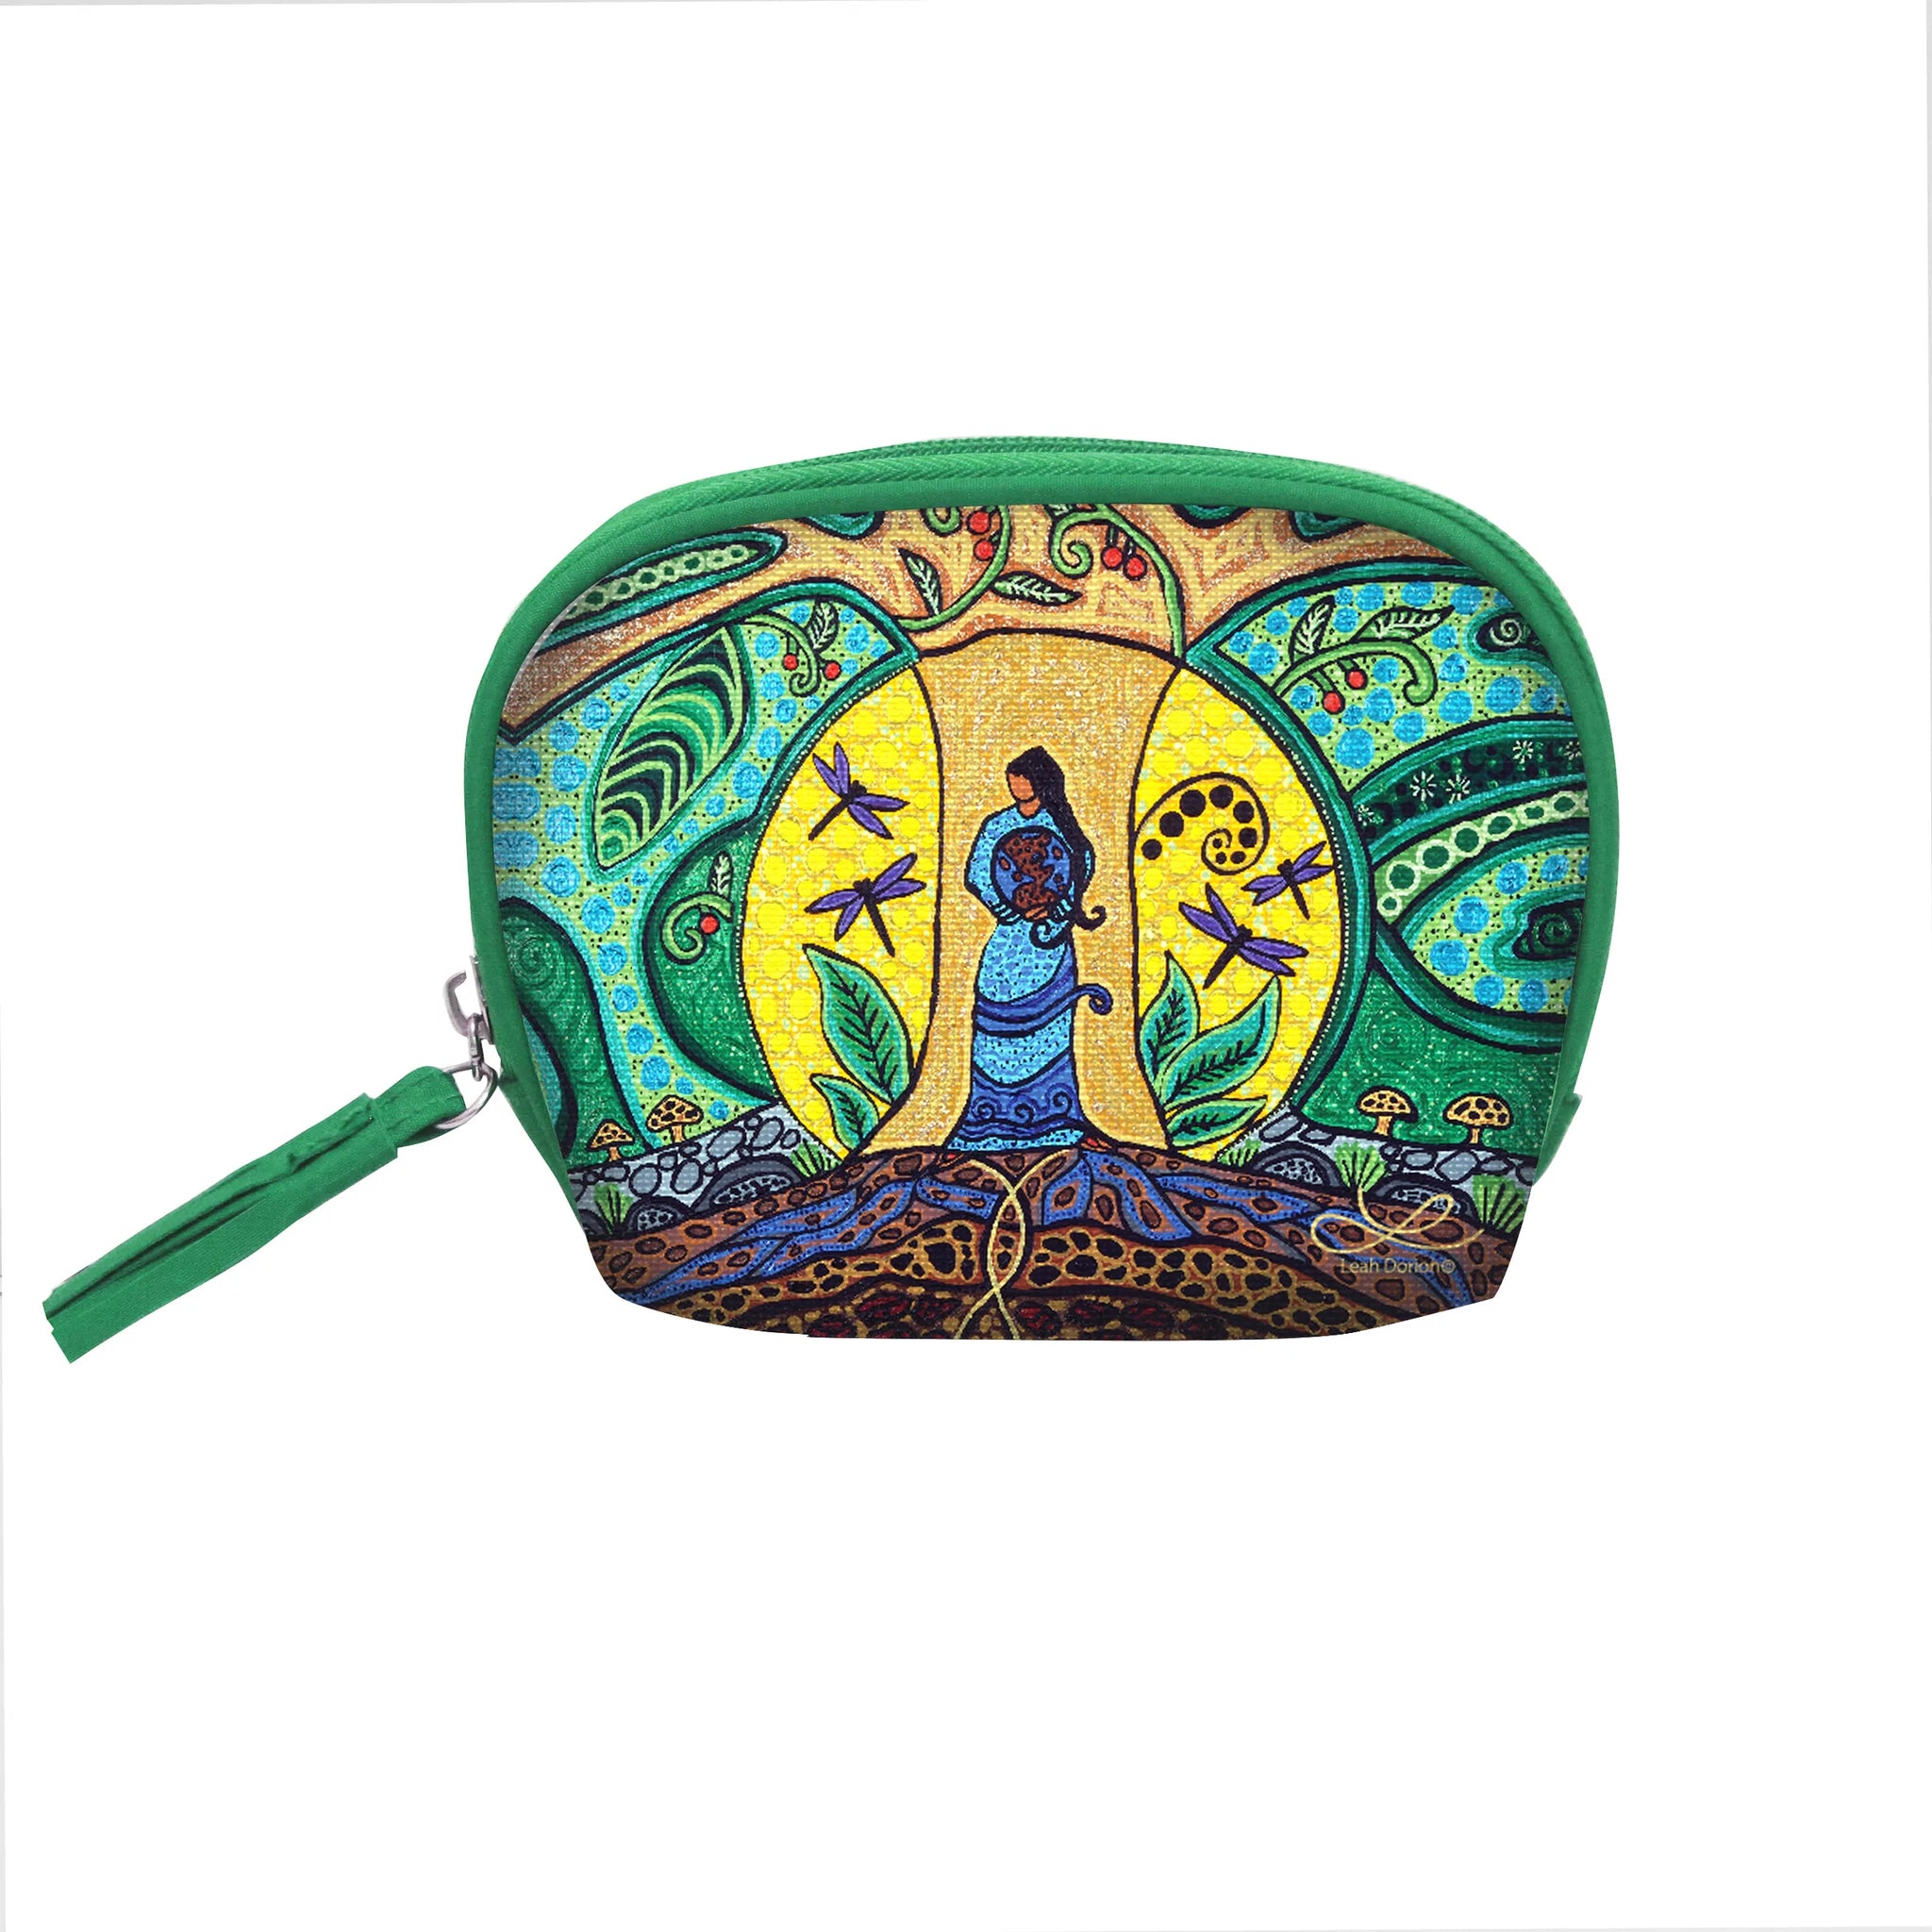 Leah Dorion Strong Earth Woman Cosmetic Bag Set